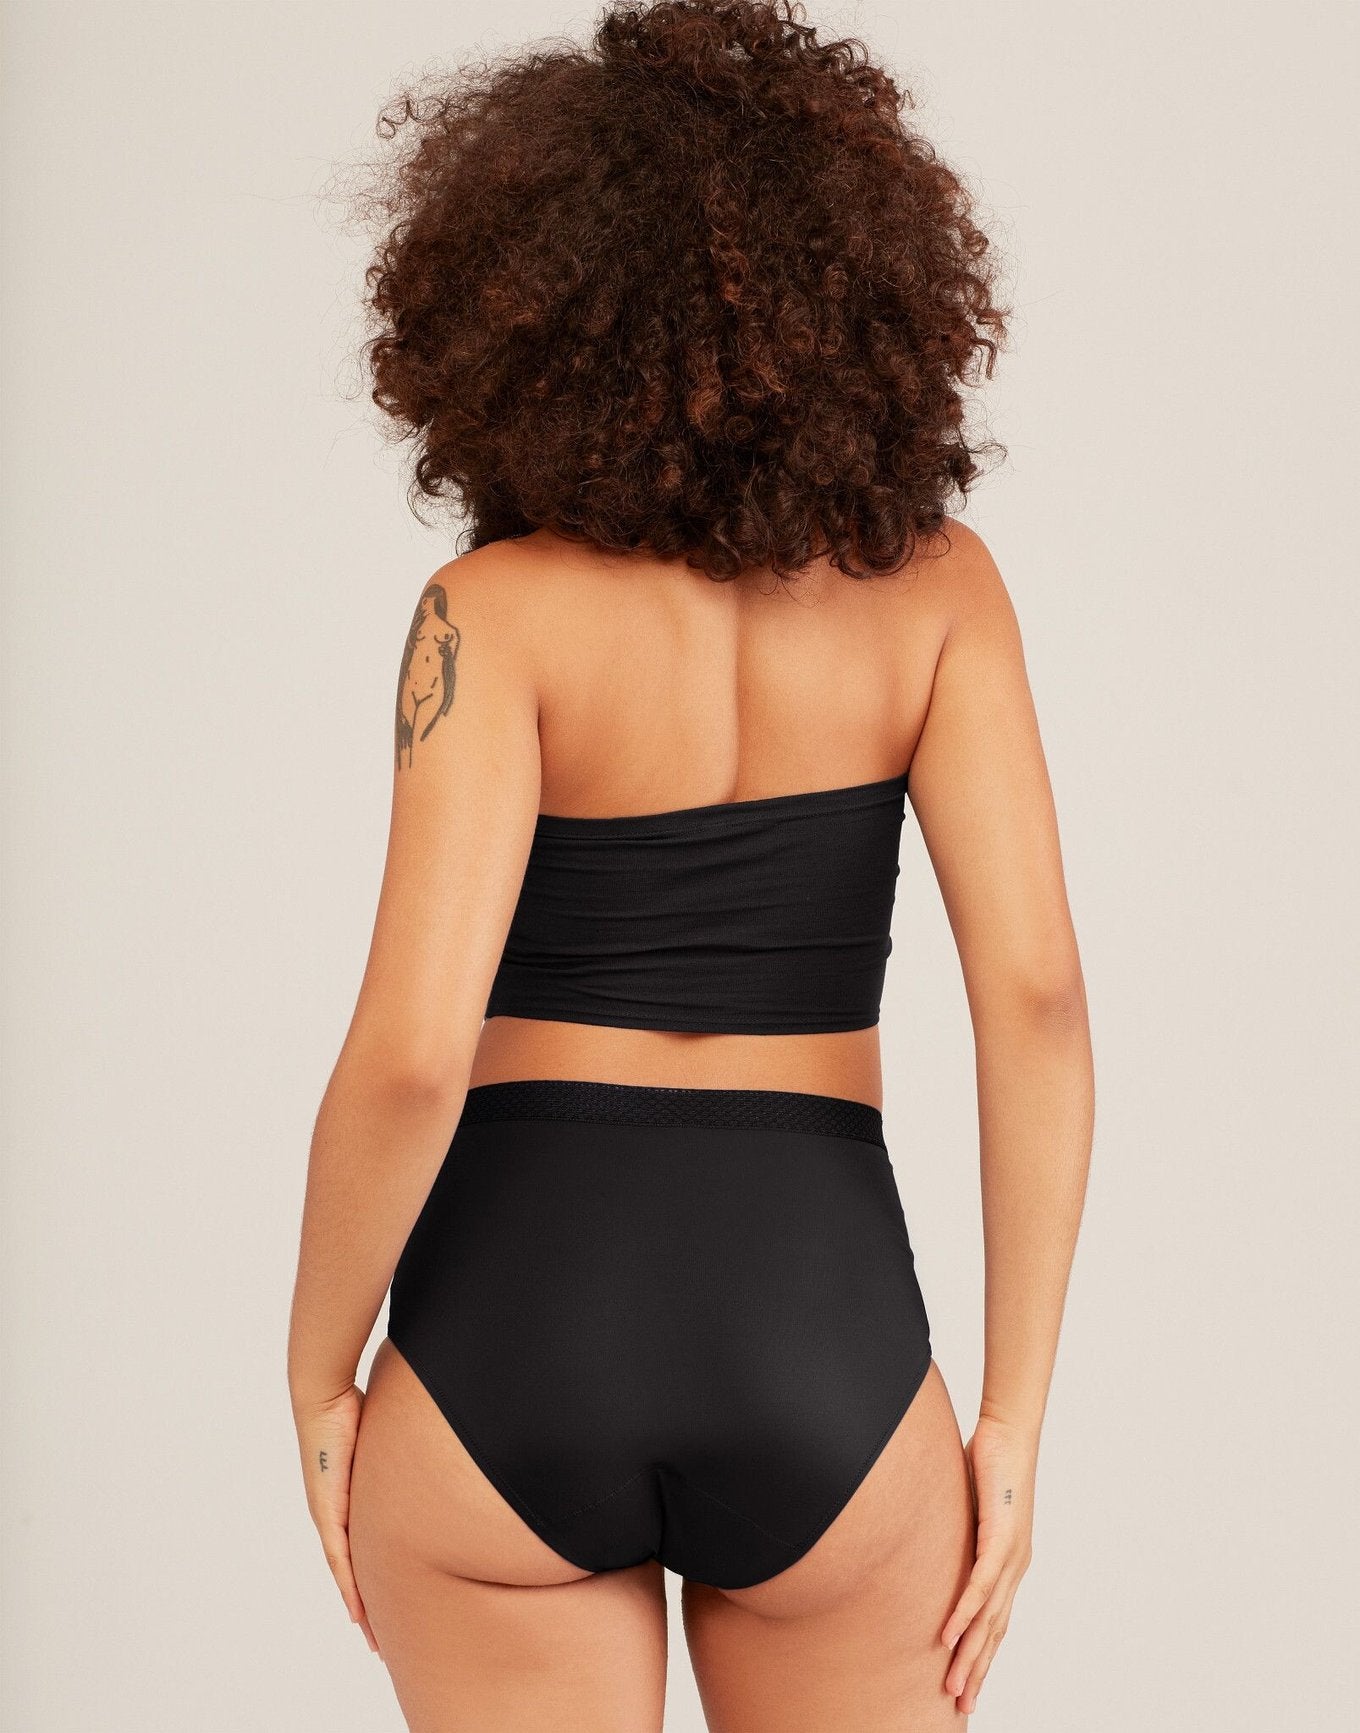 Joyja Jess period-proof panty in color Jet Black and shape high waisted